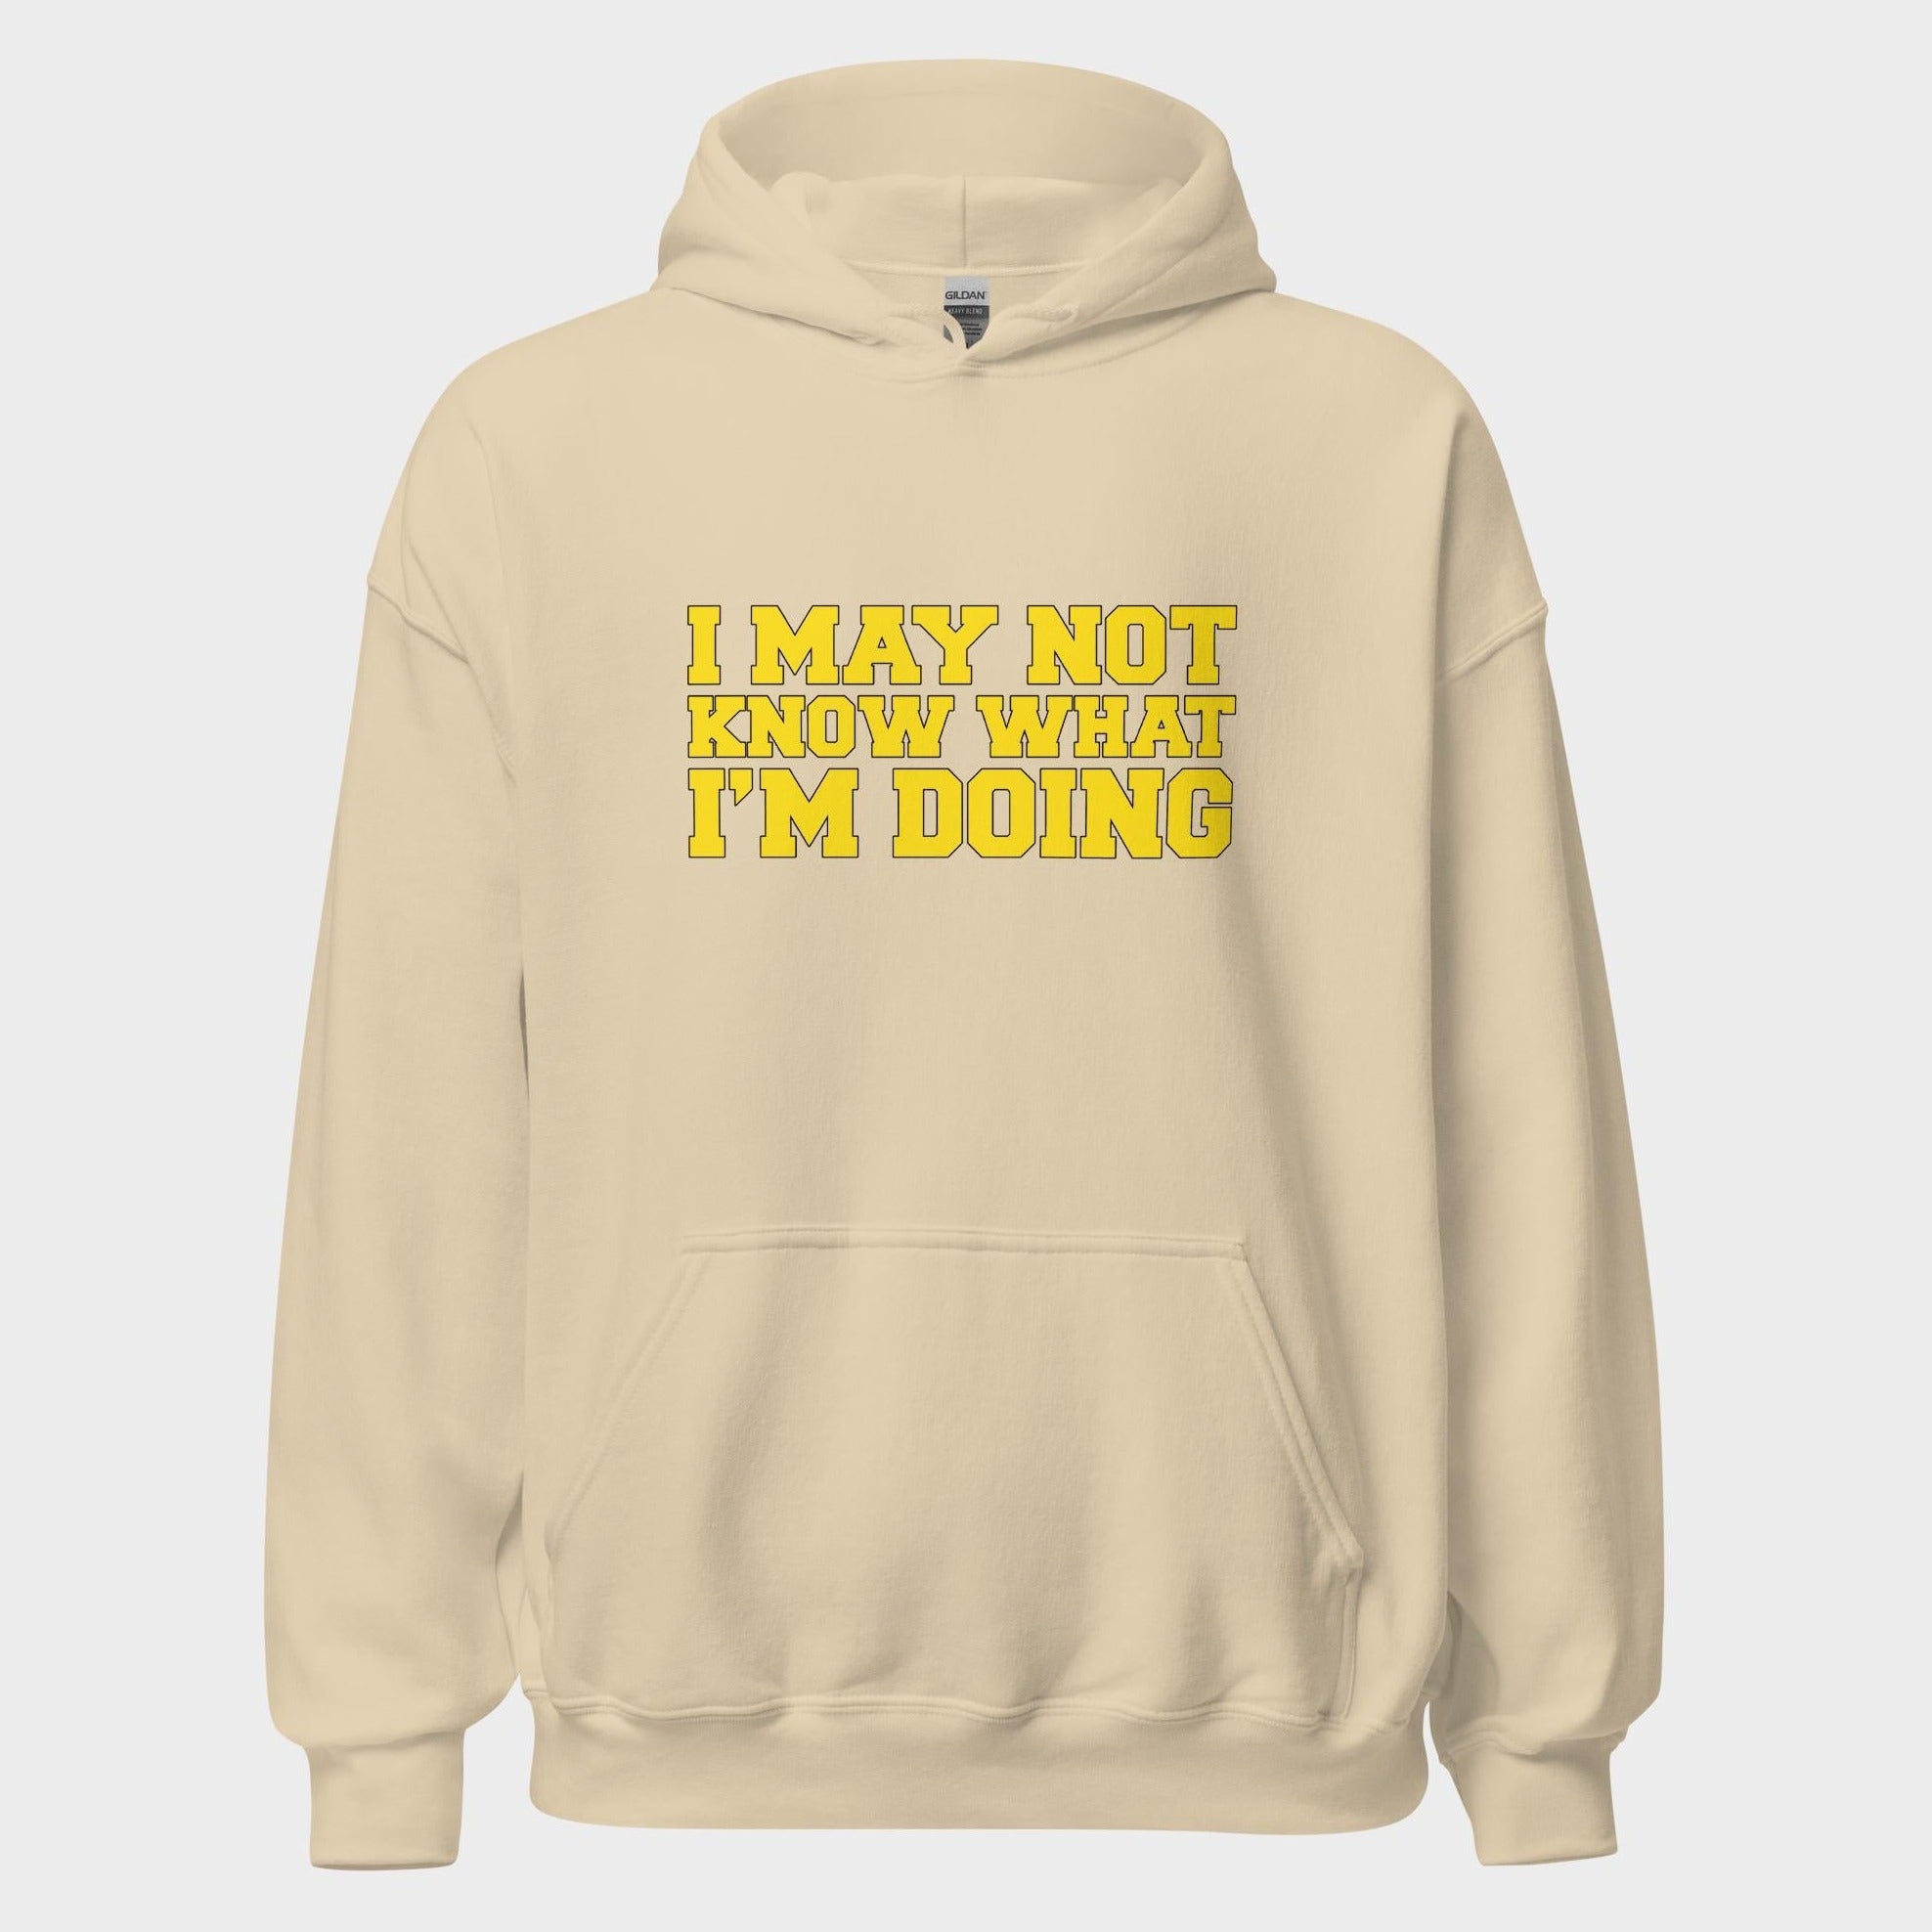 I May Not Know What I'm Doing - Hoodie